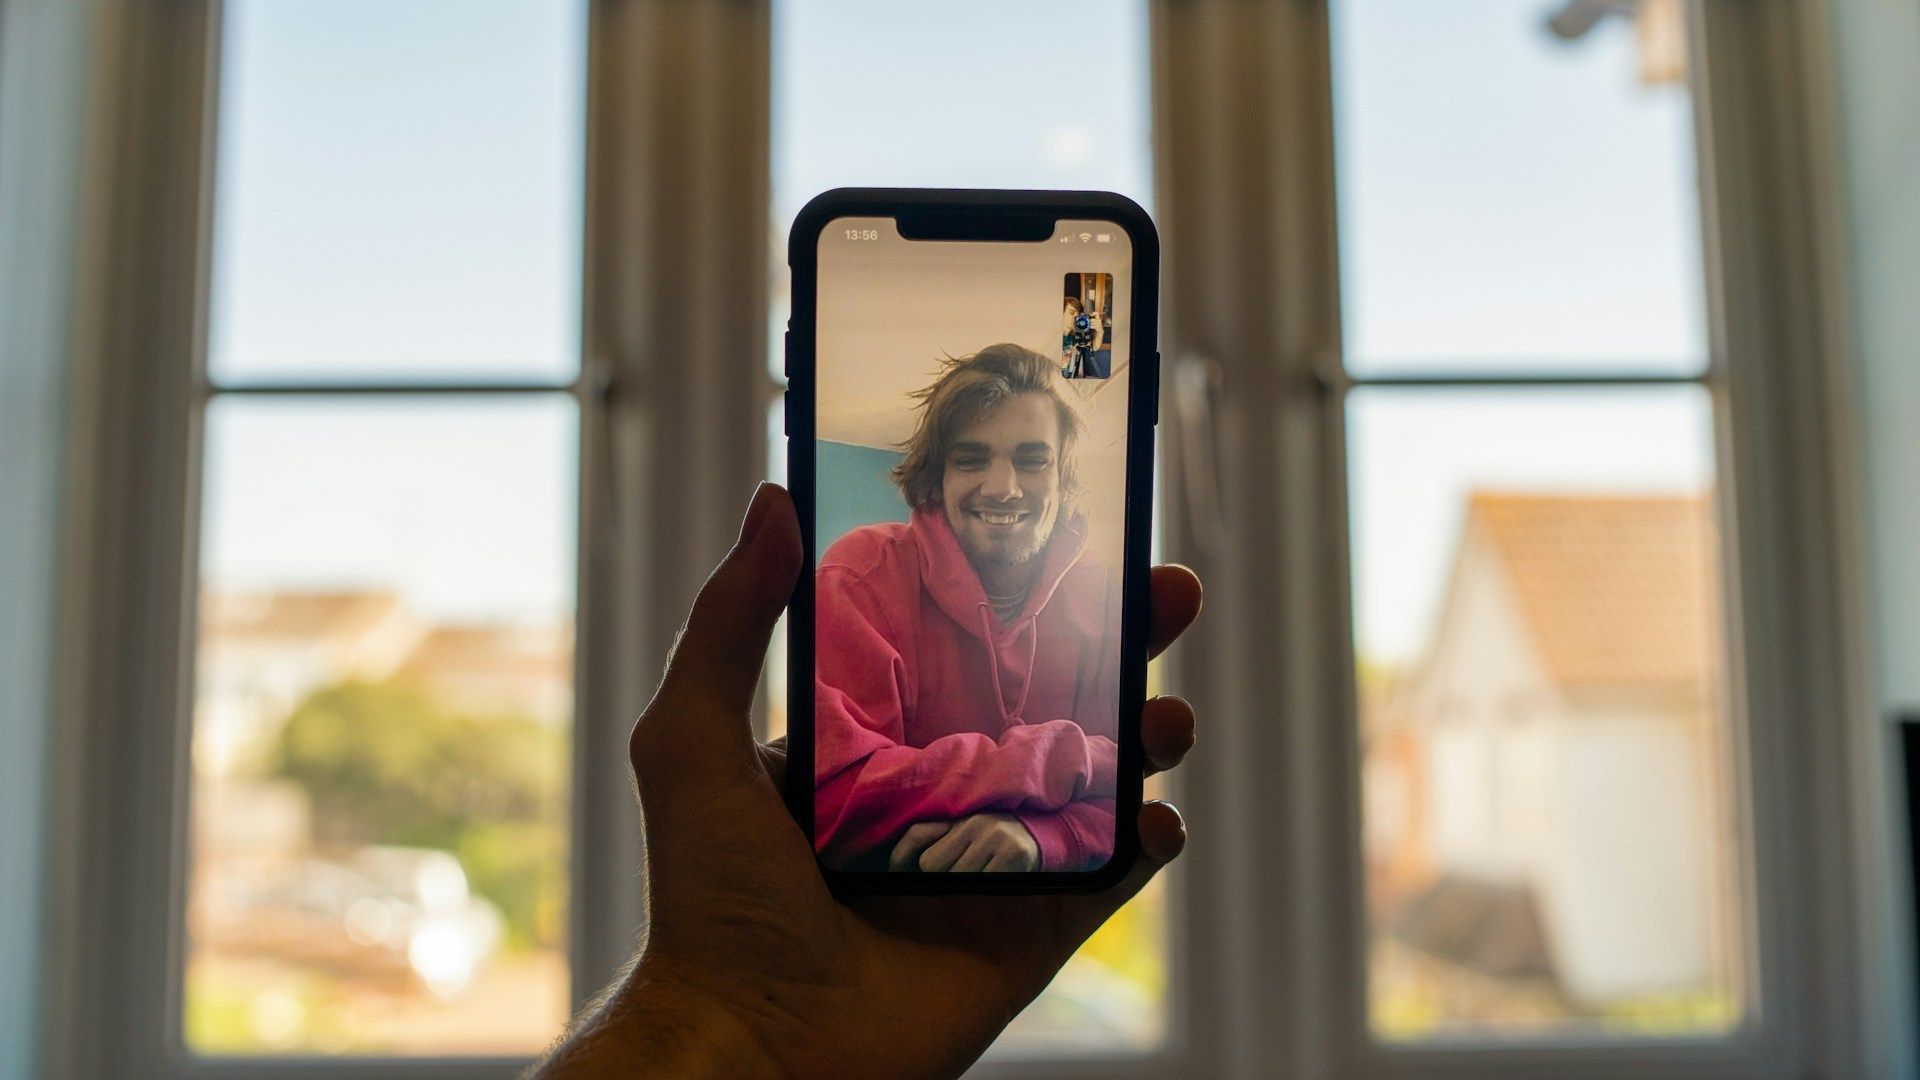 A person is holding a cell phone with a picture of a man on it.